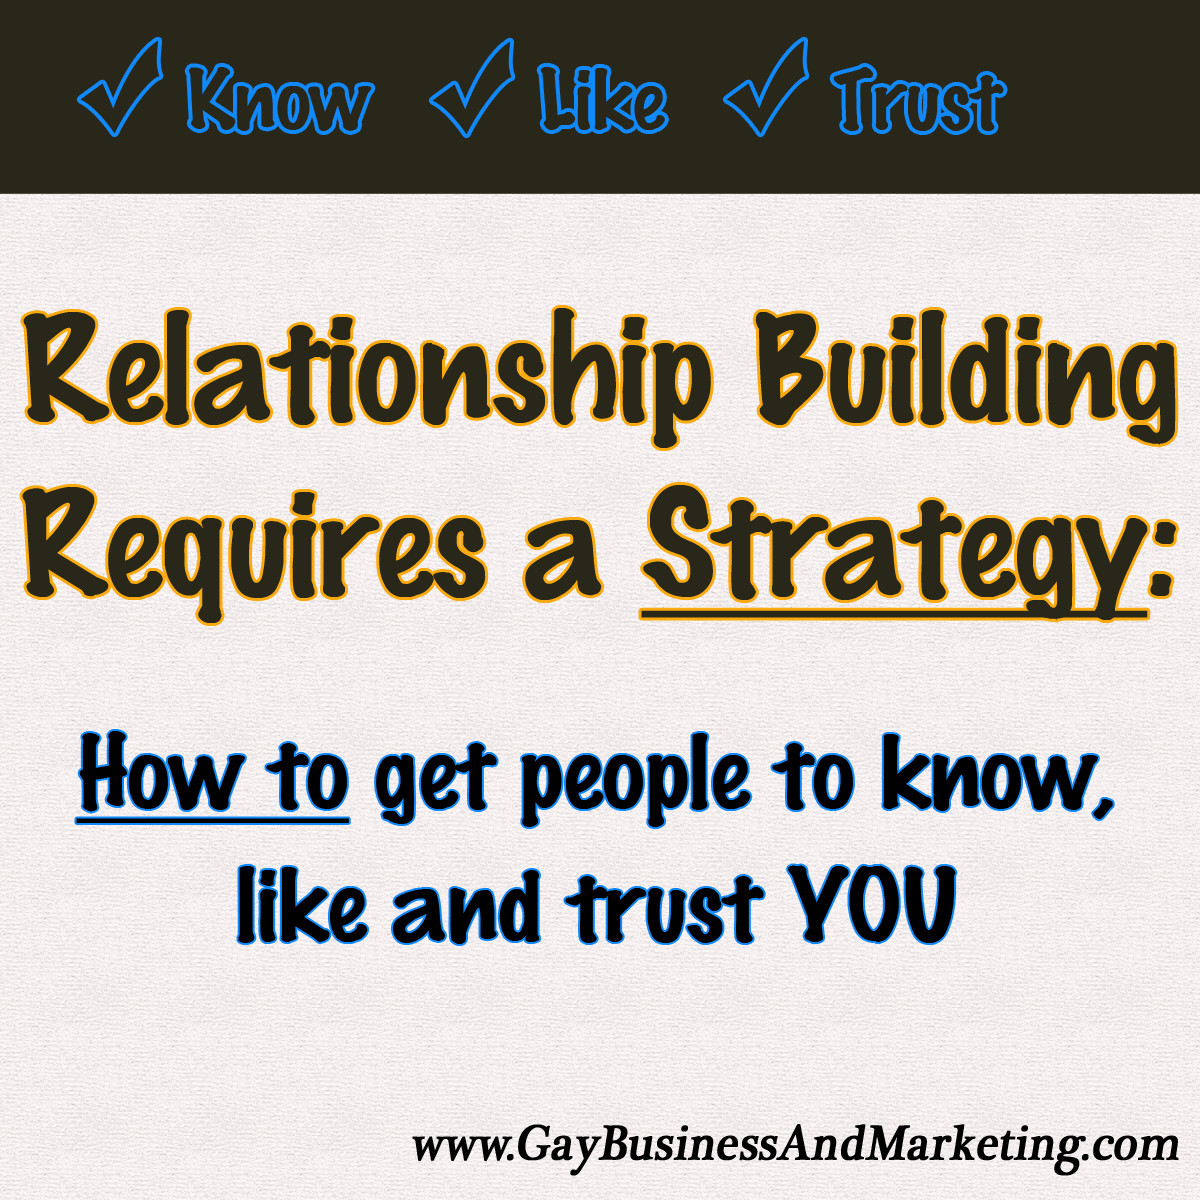 Building Relationship Quotes
 Quotes About Building Business Relationships QuotesGram